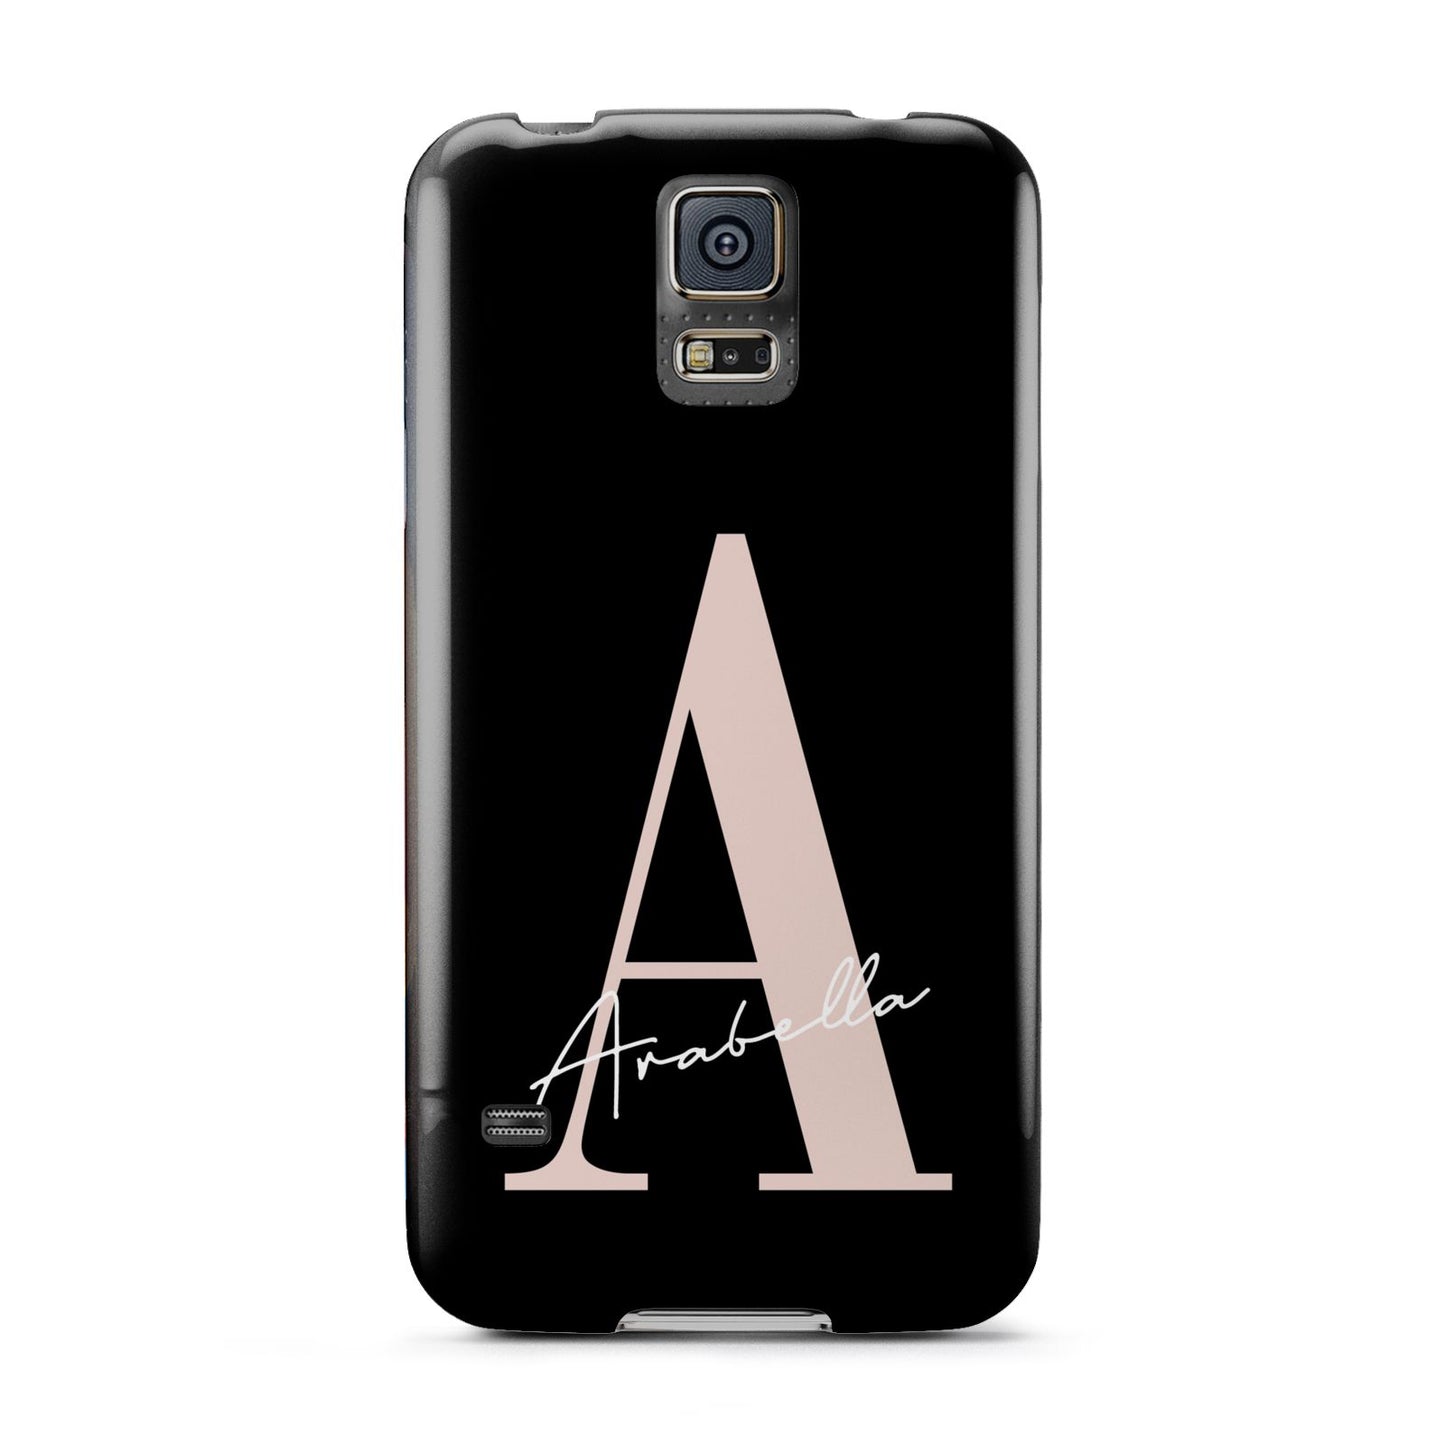 Personalised Black Pink Initial Samsung Galaxy S5 Case